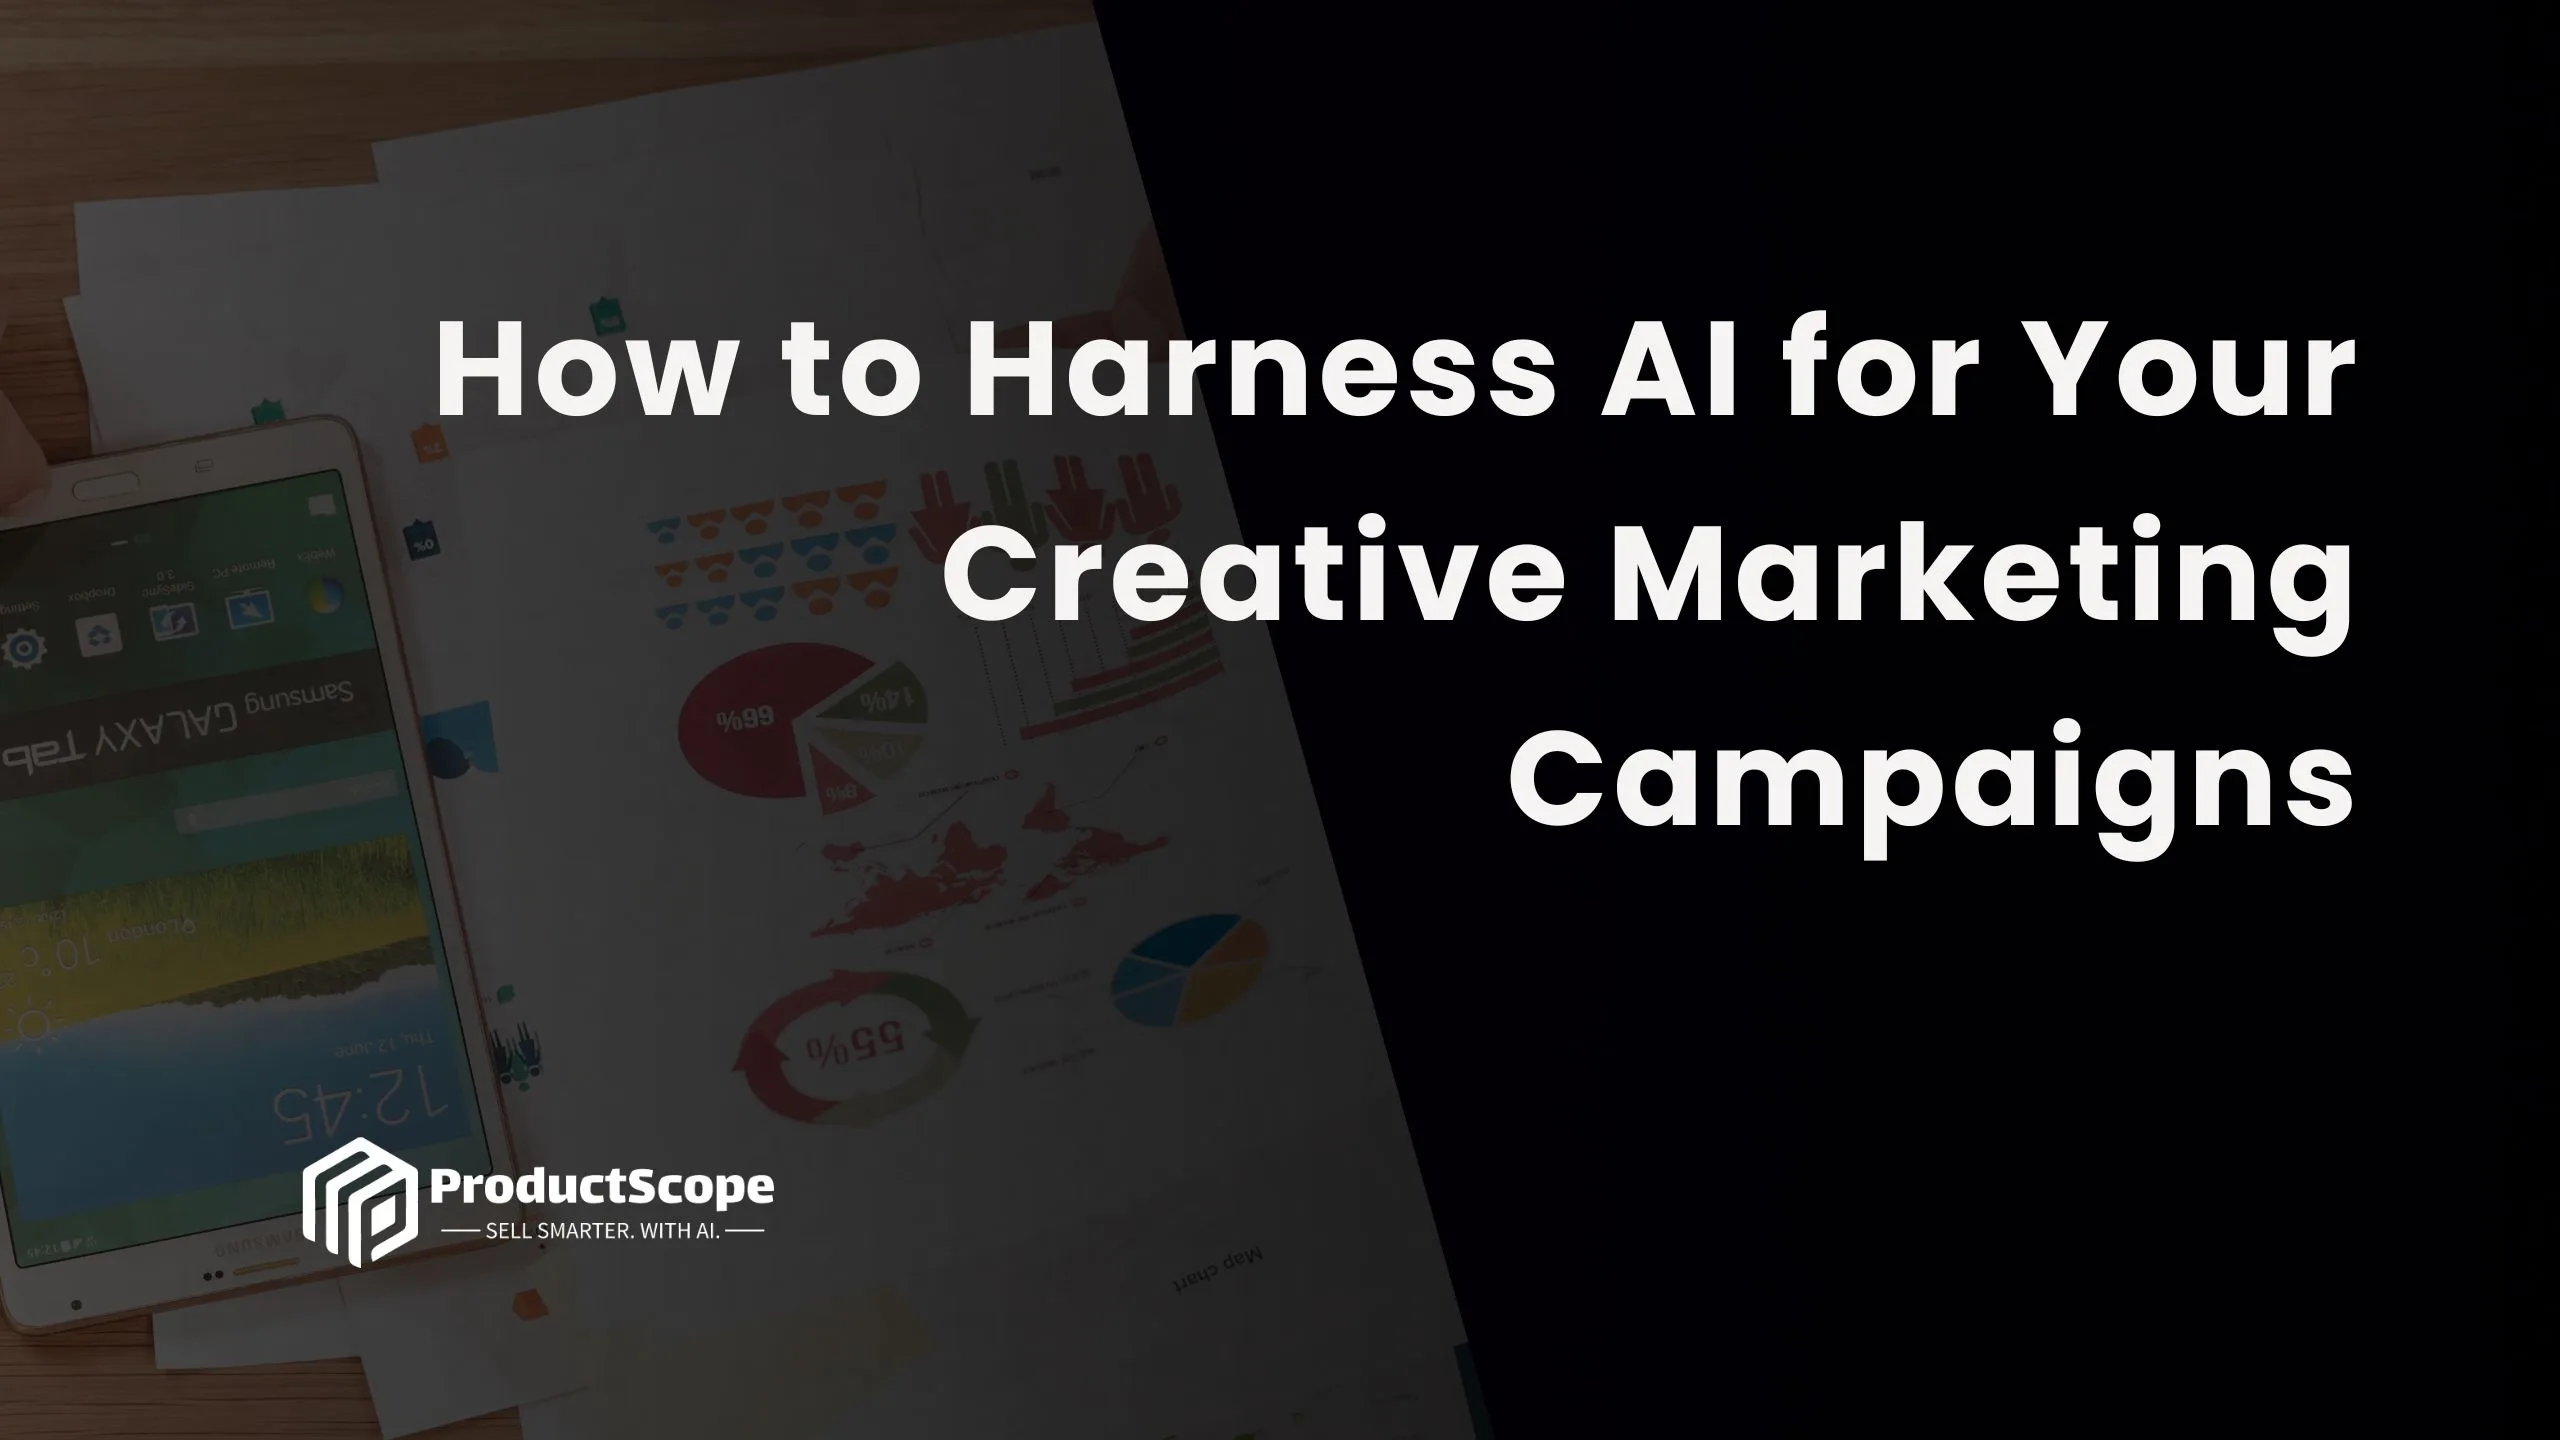 How to Harness AI for Your Creative Marketing Campaigns